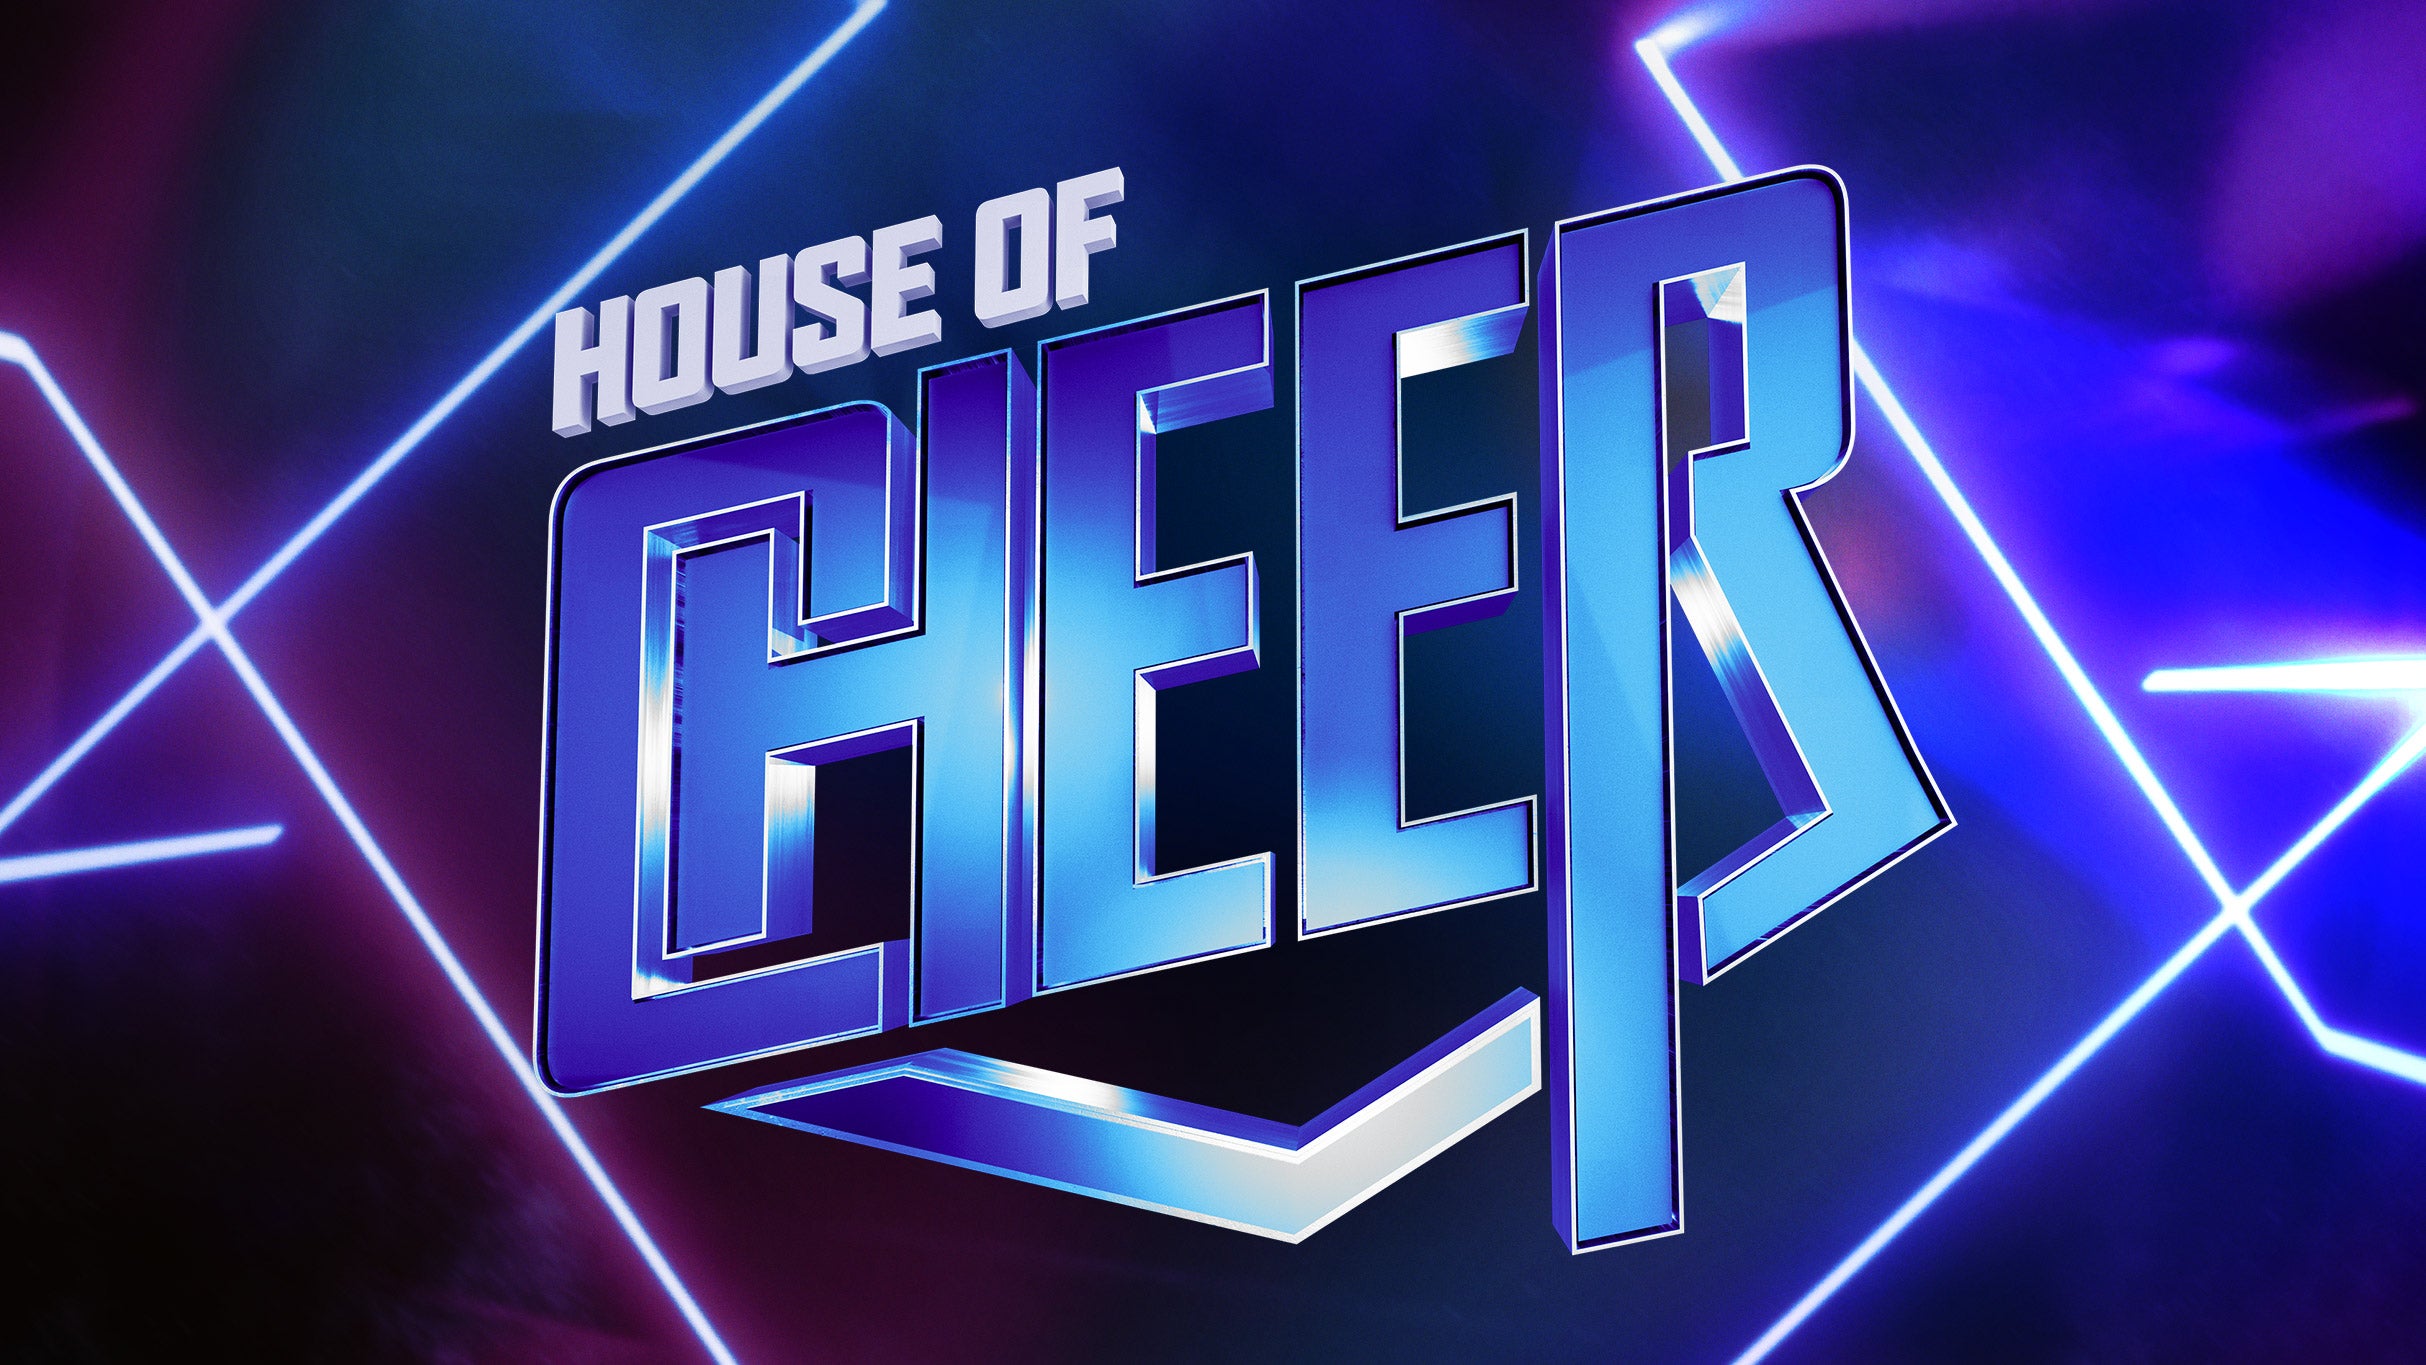 House of Cheer: The Level Up Tour 2023 presale password for your tickets in Philadelphia